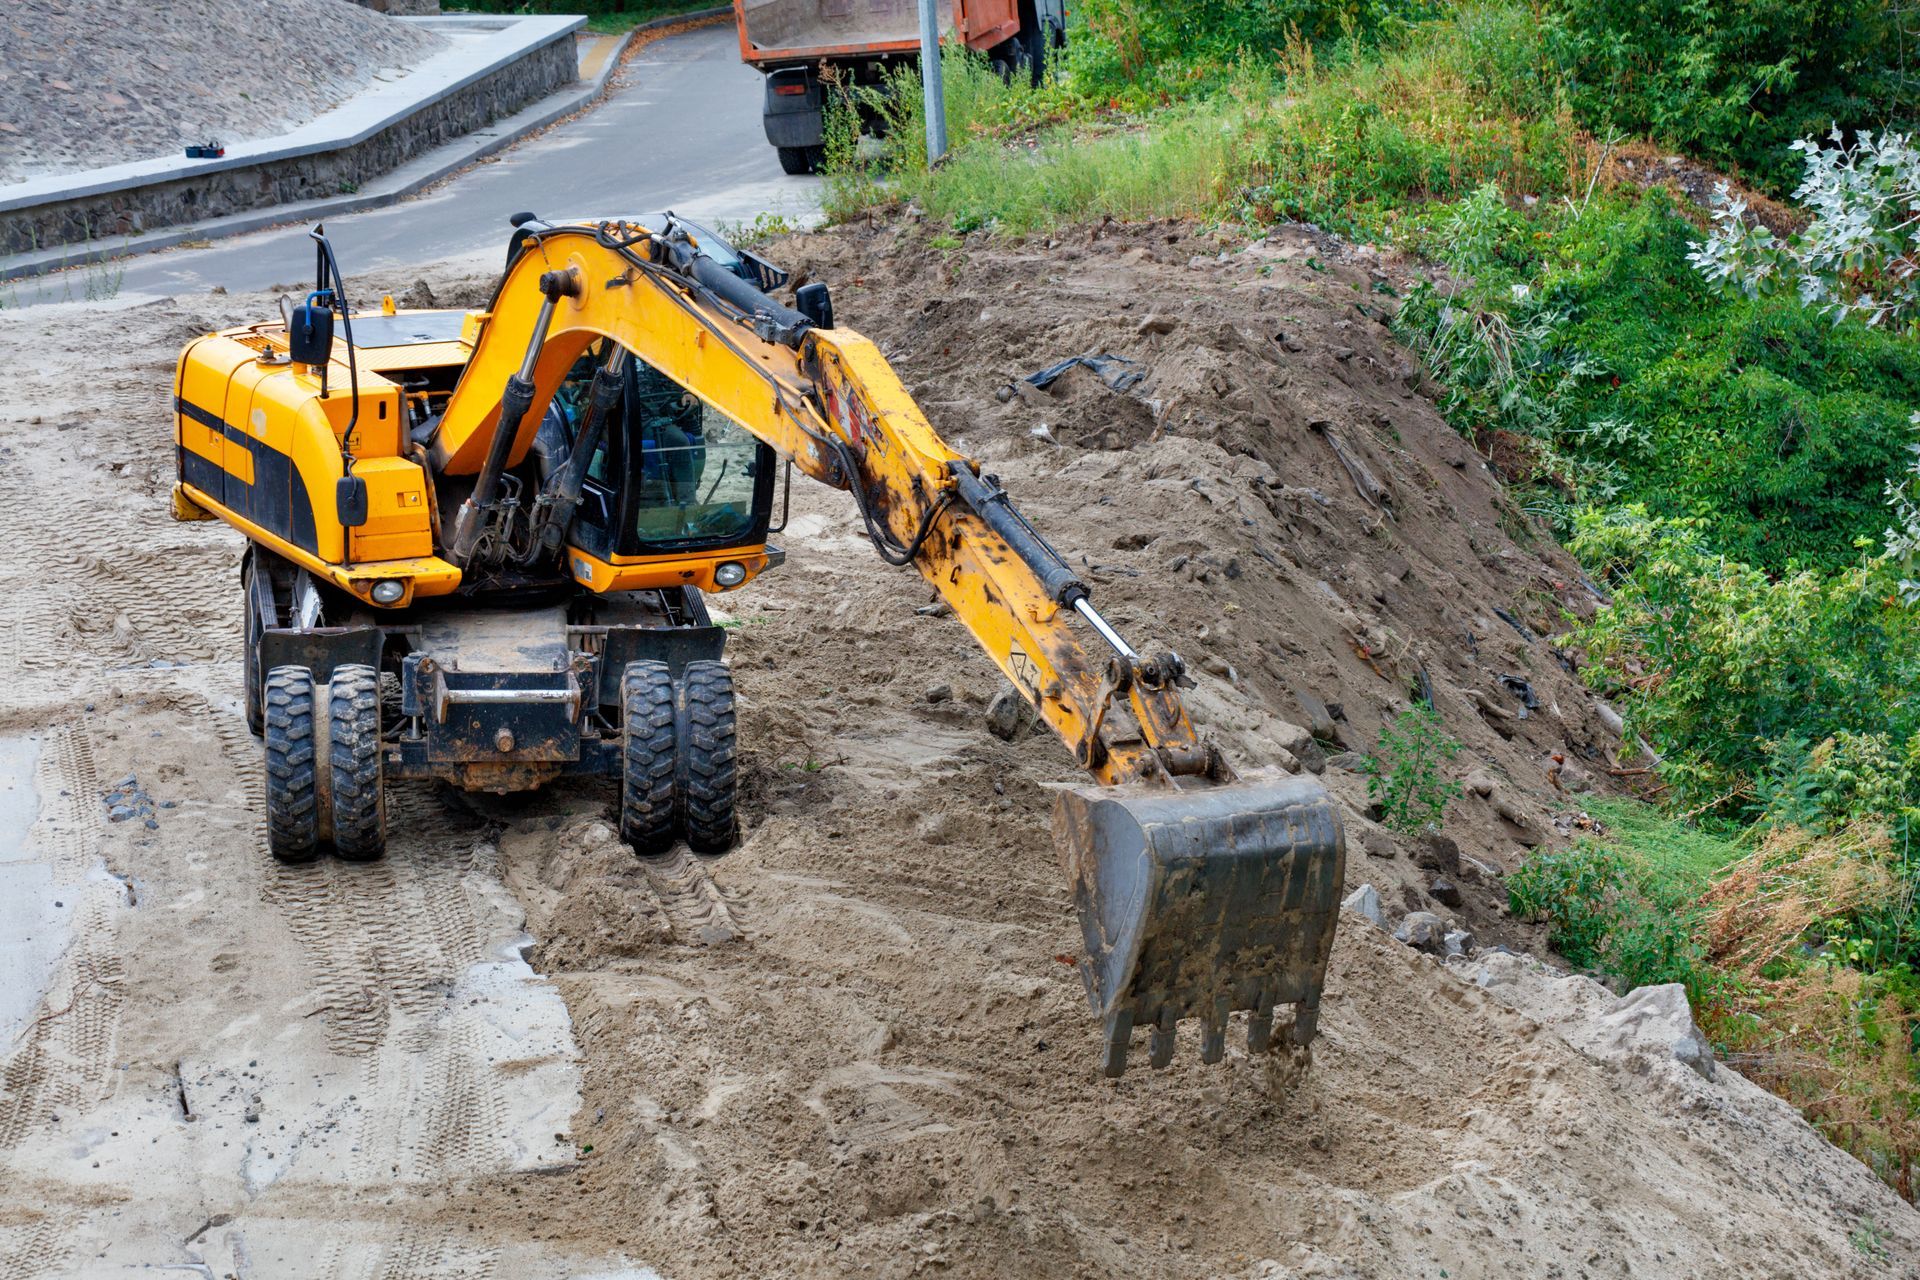 a construction excavator clears a construction site for the foundation of a future home.